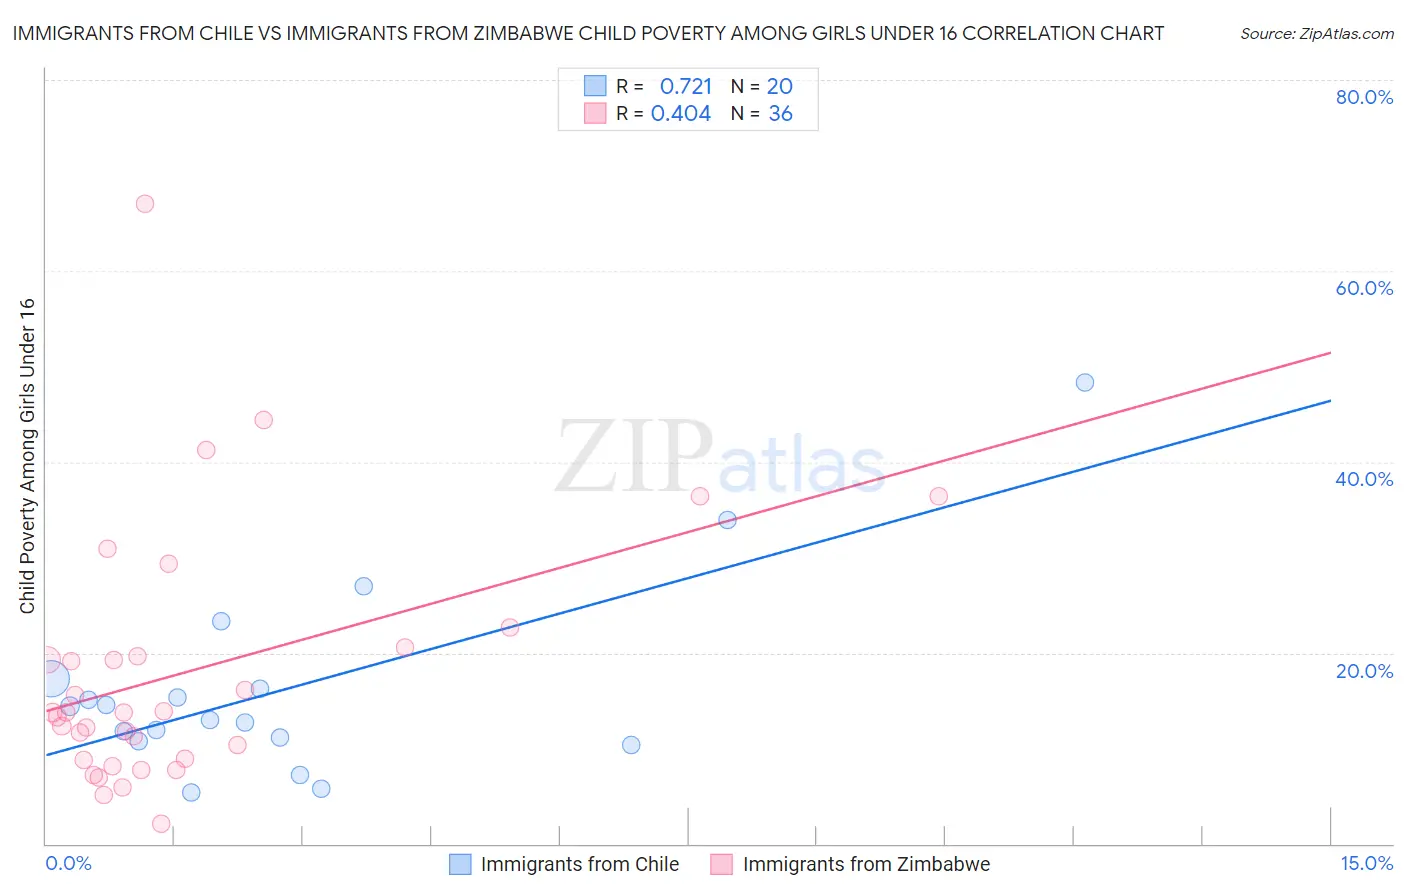 Immigrants from Chile vs Immigrants from Zimbabwe Child Poverty Among Girls Under 16